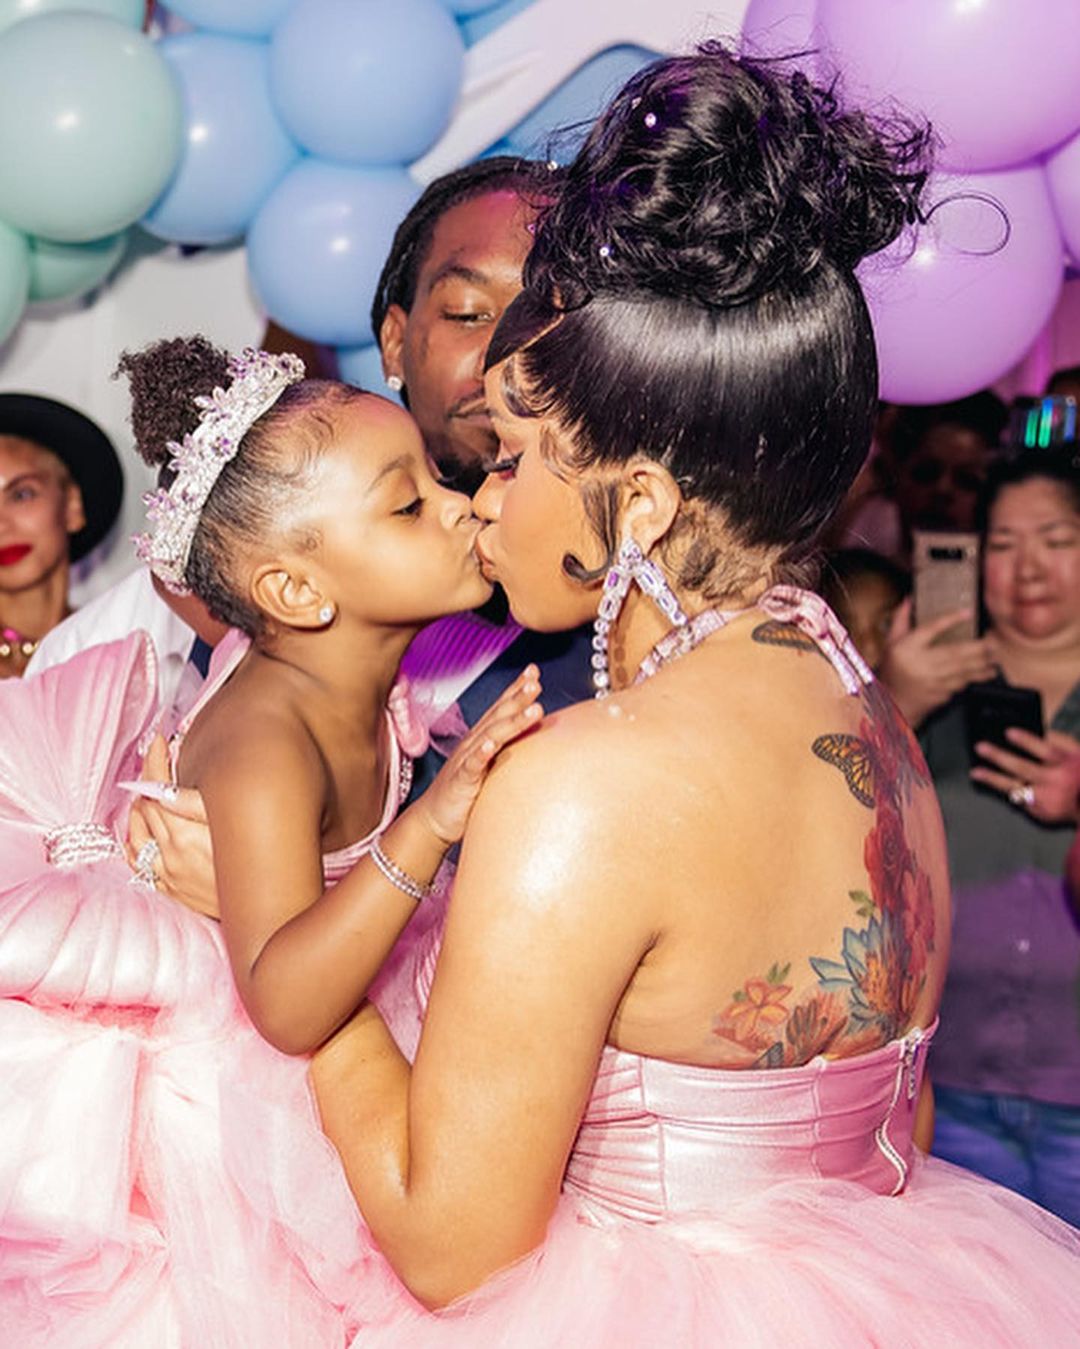 Cardi B & Offset Spends  Extravagant on 3rd Birthday Party for Kulture